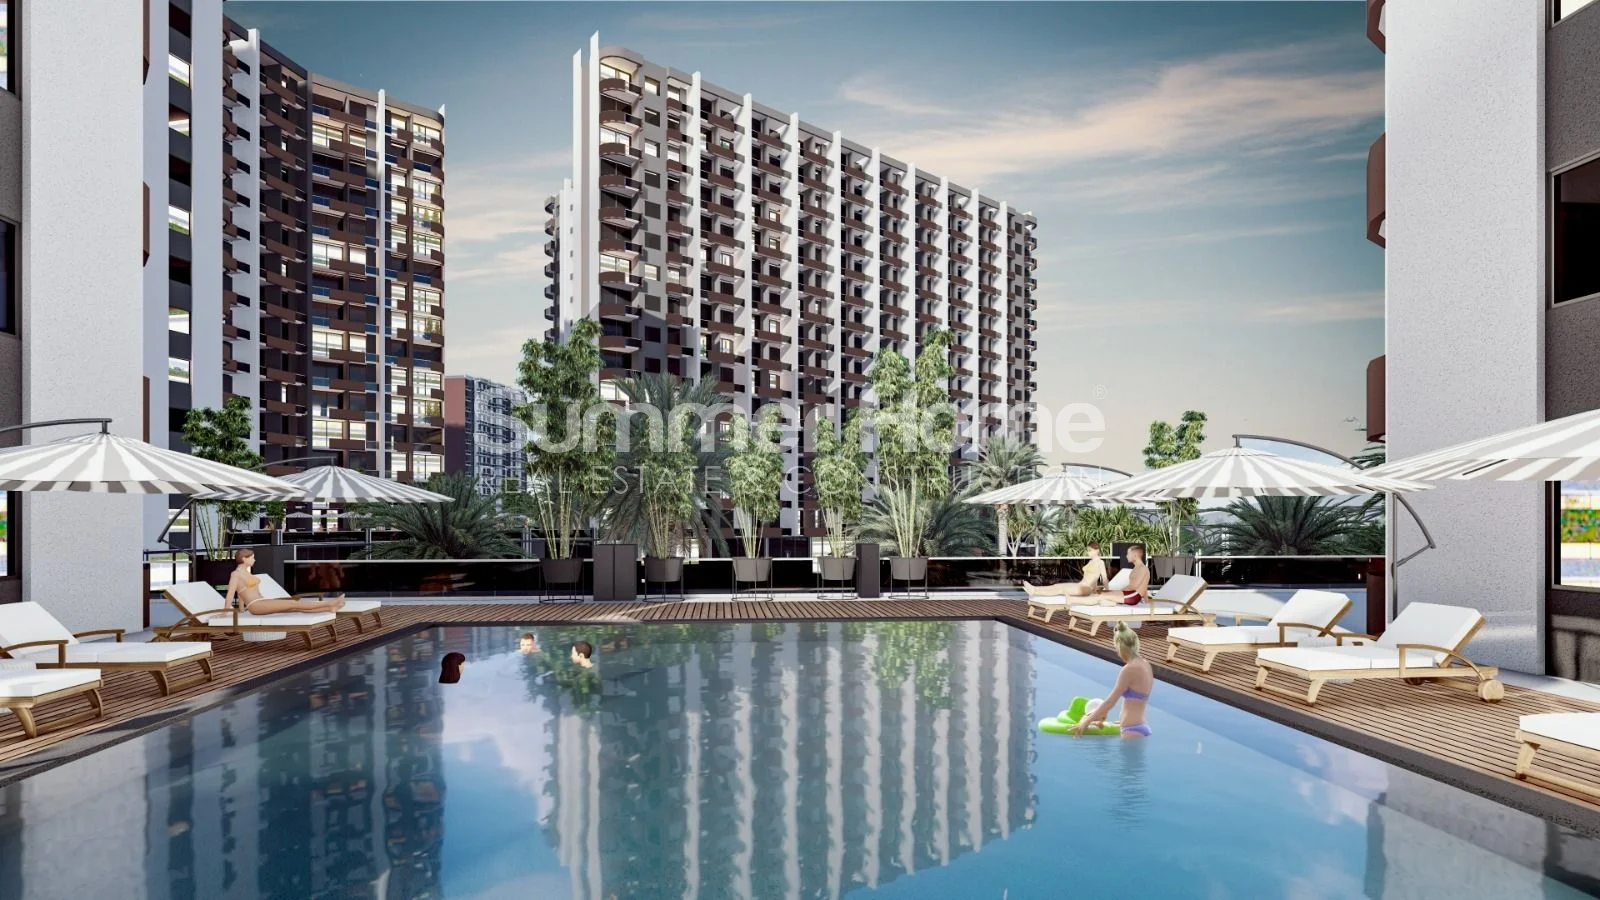 Highly modern apartments located in Tarsus, Mersin General - 2